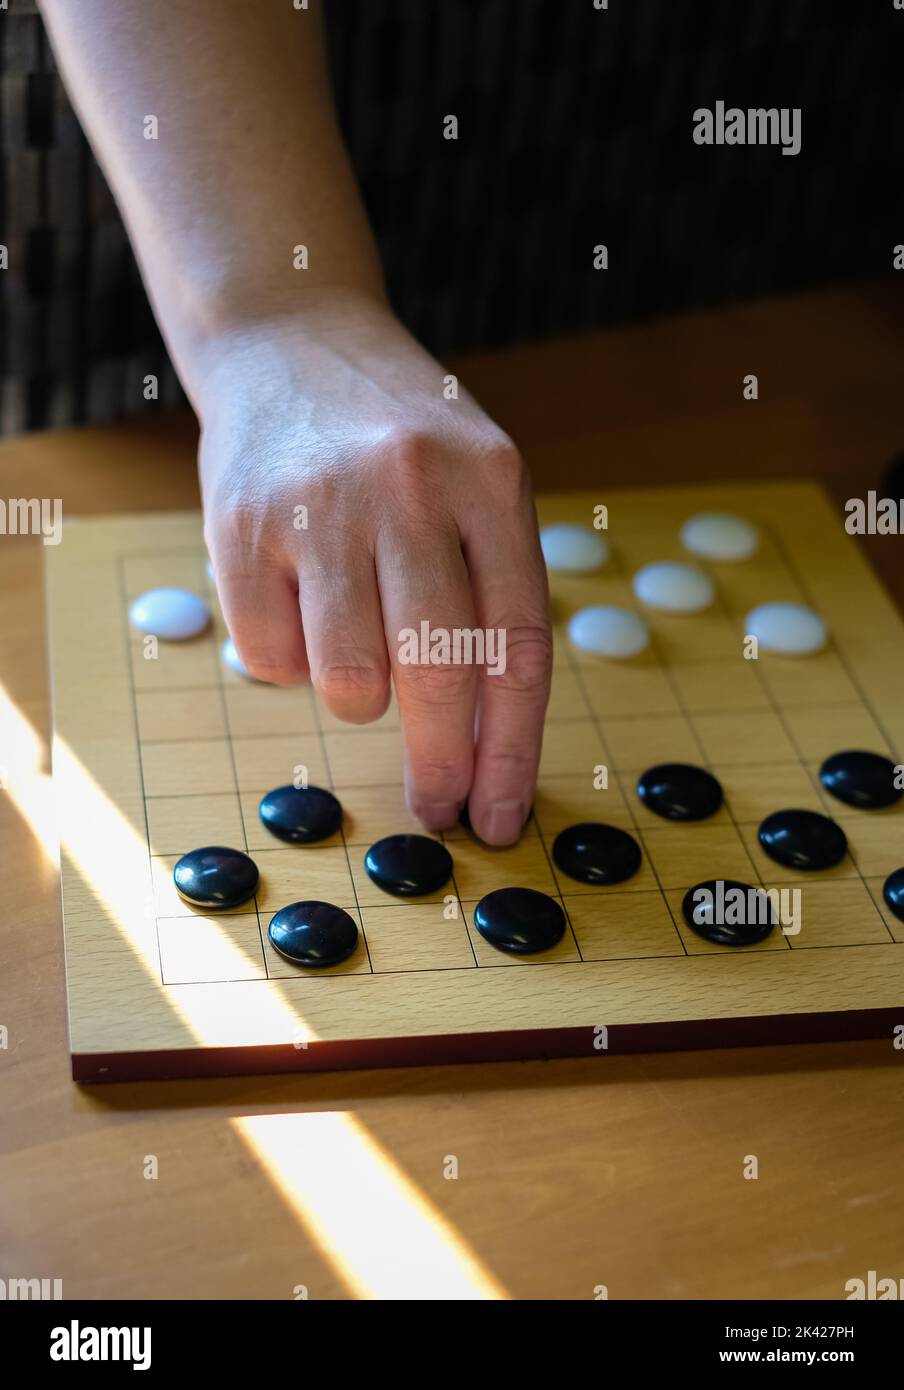 Chinese go game board, close up view of playing black and white stone pieces, Alphago. Hands of woman playing Asian board game. Selective focus Stock Photo